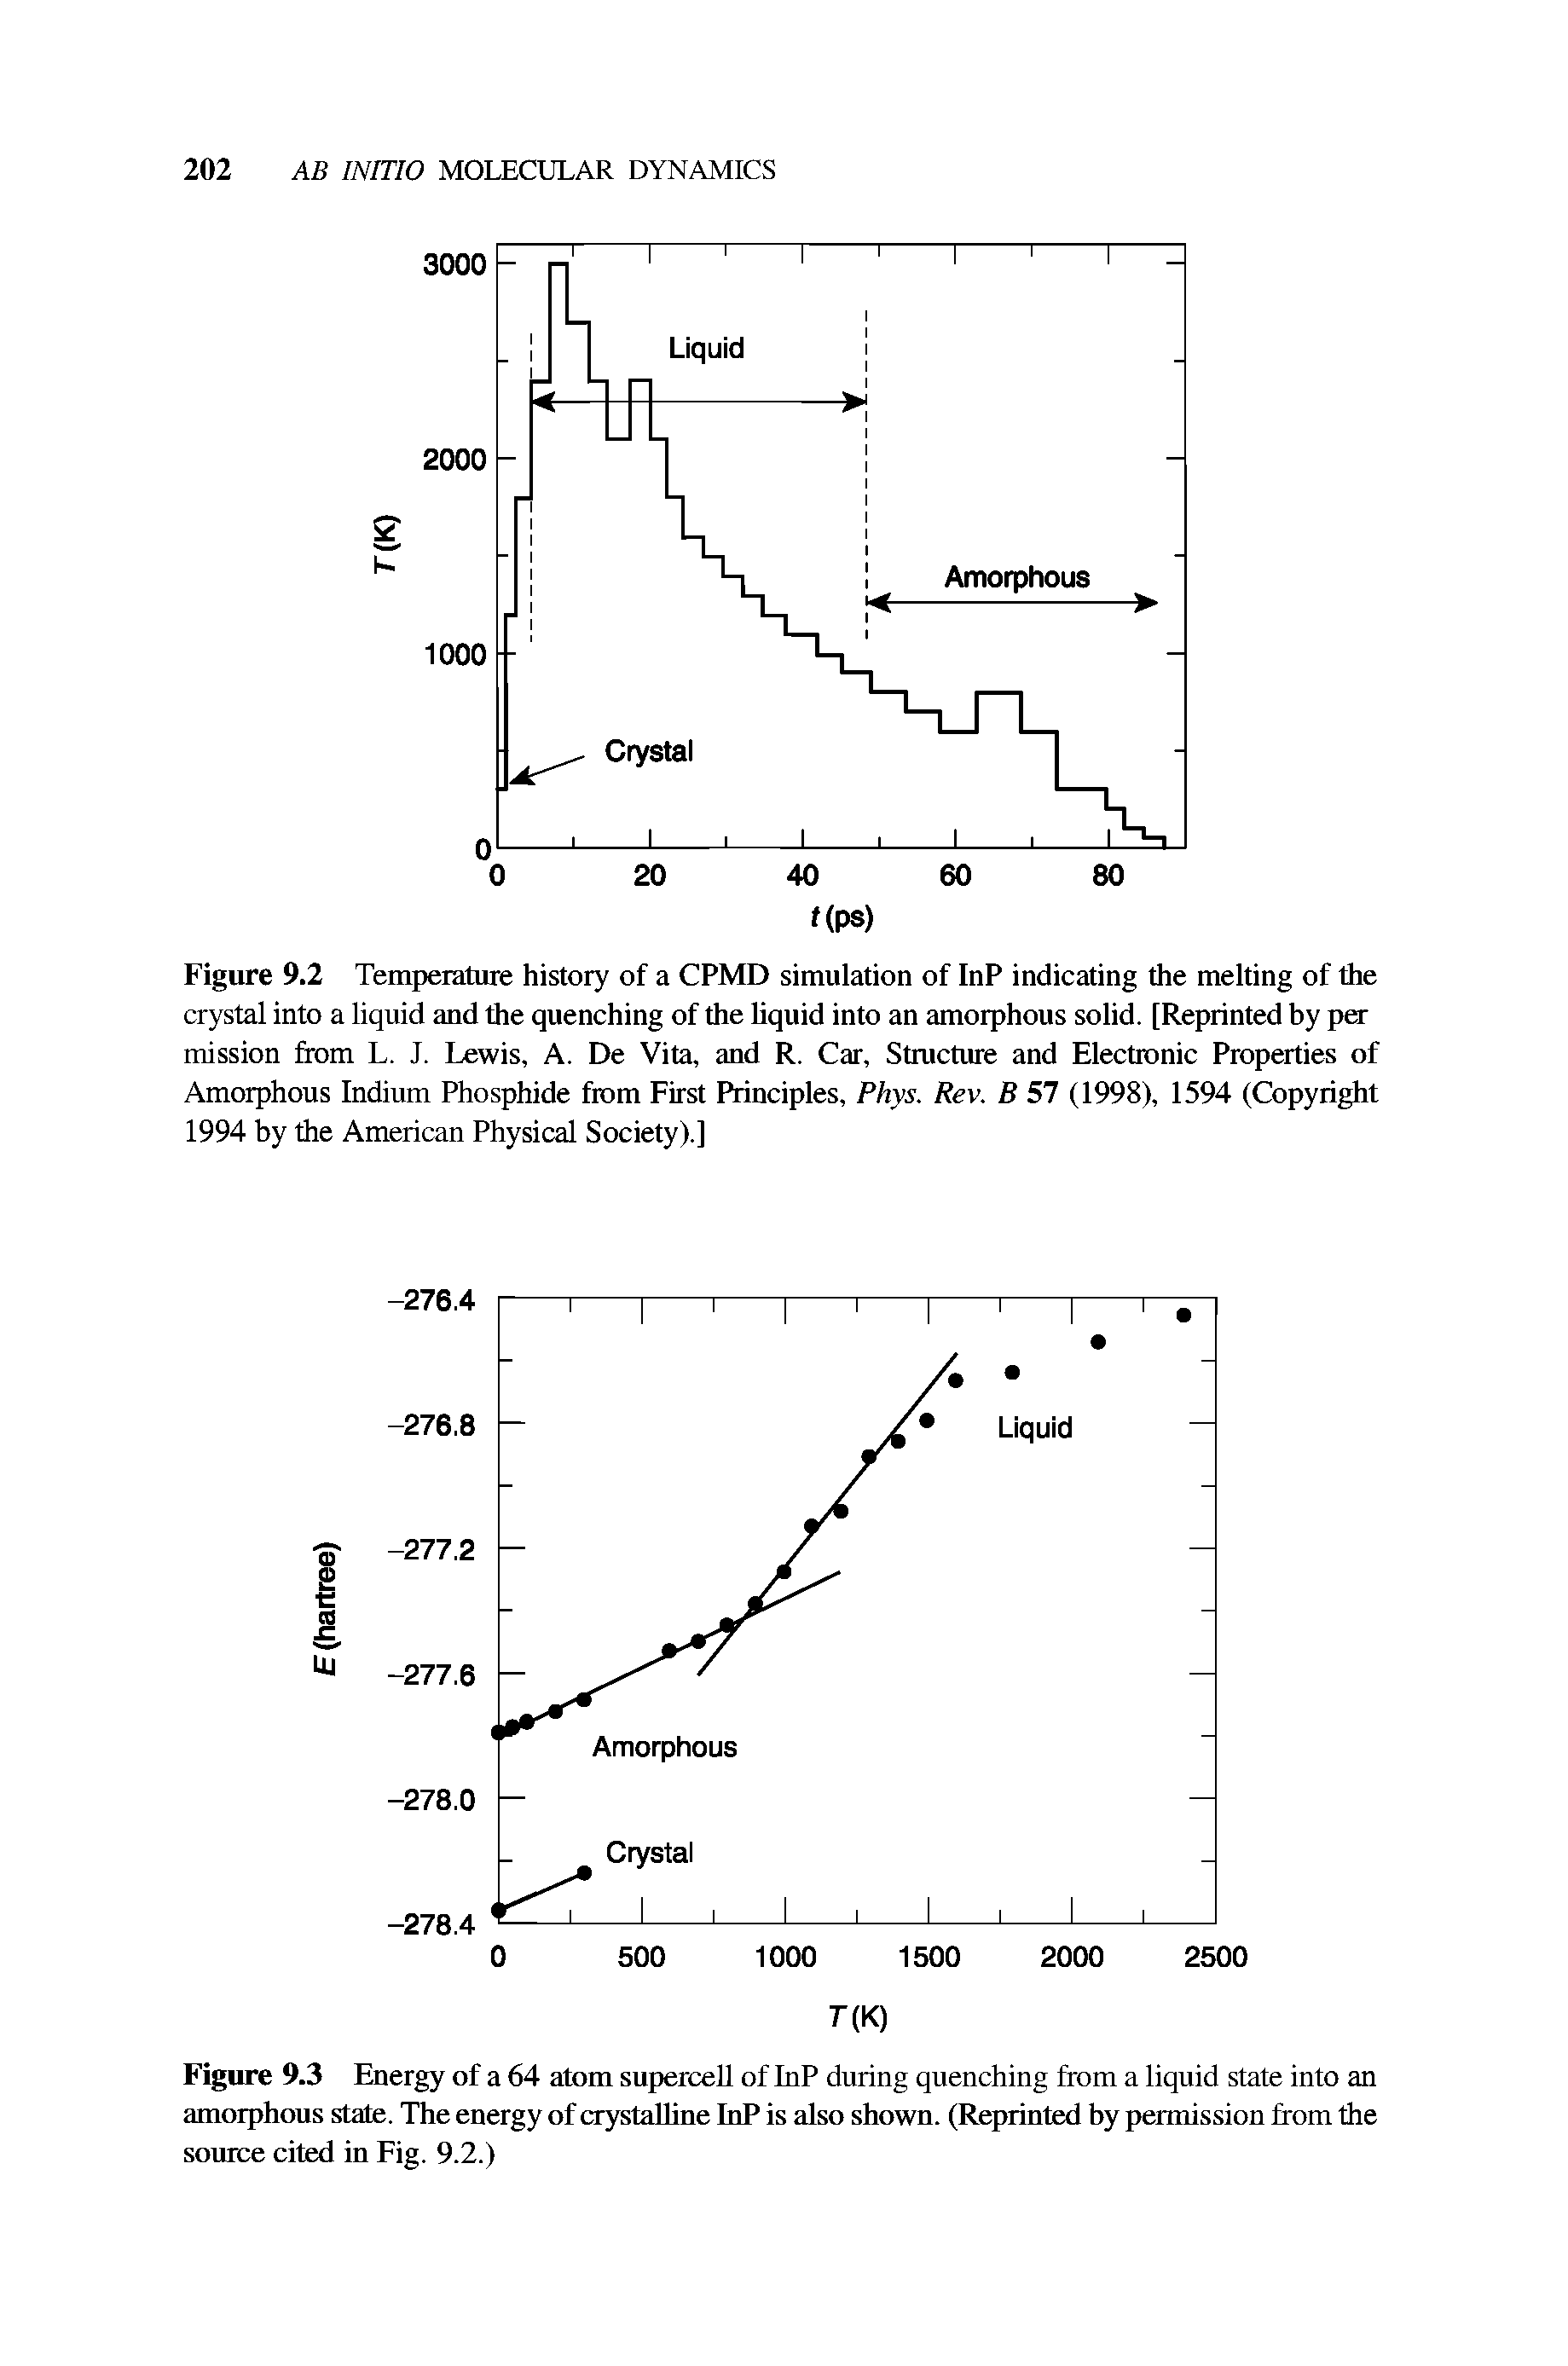 Figure 9.3 Energy of a 64 atom supercell of InP during quenching from a liquid state into an amorphous state. The energy of crystalline InP is also shown. (Reprinted by permission from the source cited in Fig. 9.2.)...